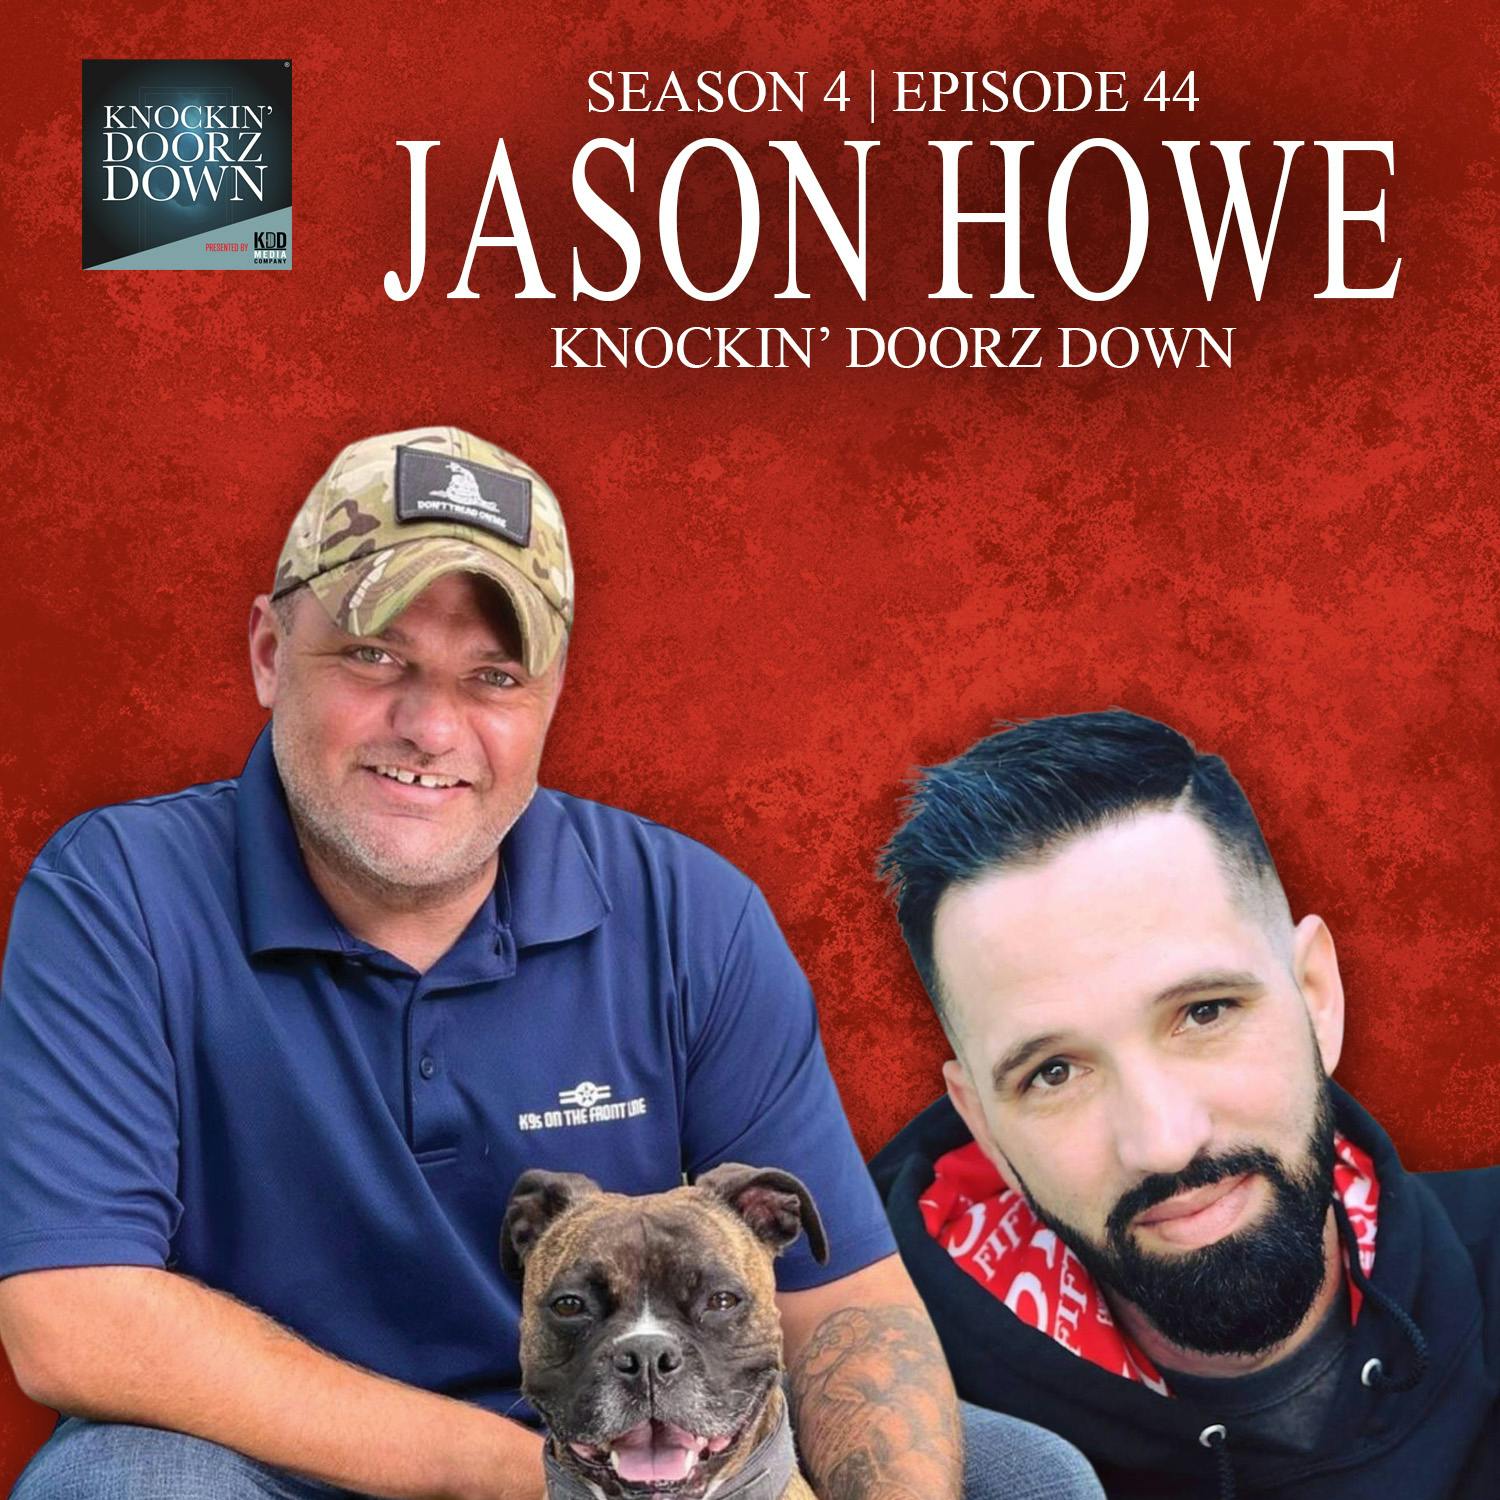 Finding Sobriety Training Service Dogs For Veterans With PTSD And TBI  With Jason Howe